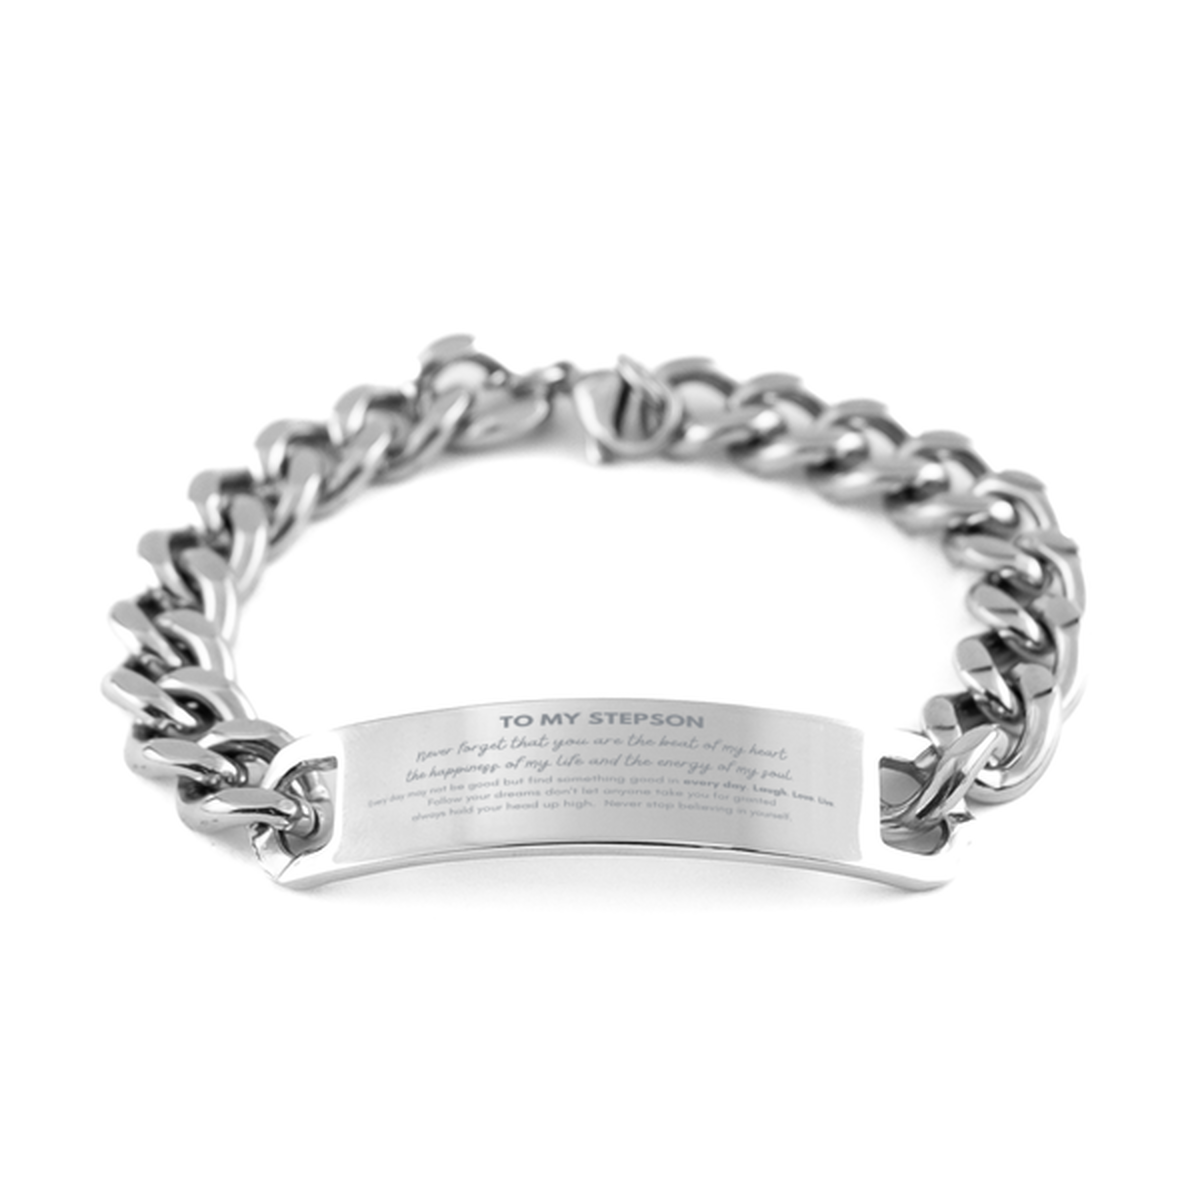 To My Stepson Bracelet Gifts, Christmas Stepson Cuban Chain Stainless Steel Bracelet Present, Birthday Unique Motivational For Stepson, To My Stepson Never forget that you are the beat of my heart the happiness of my life and the energy of my soul